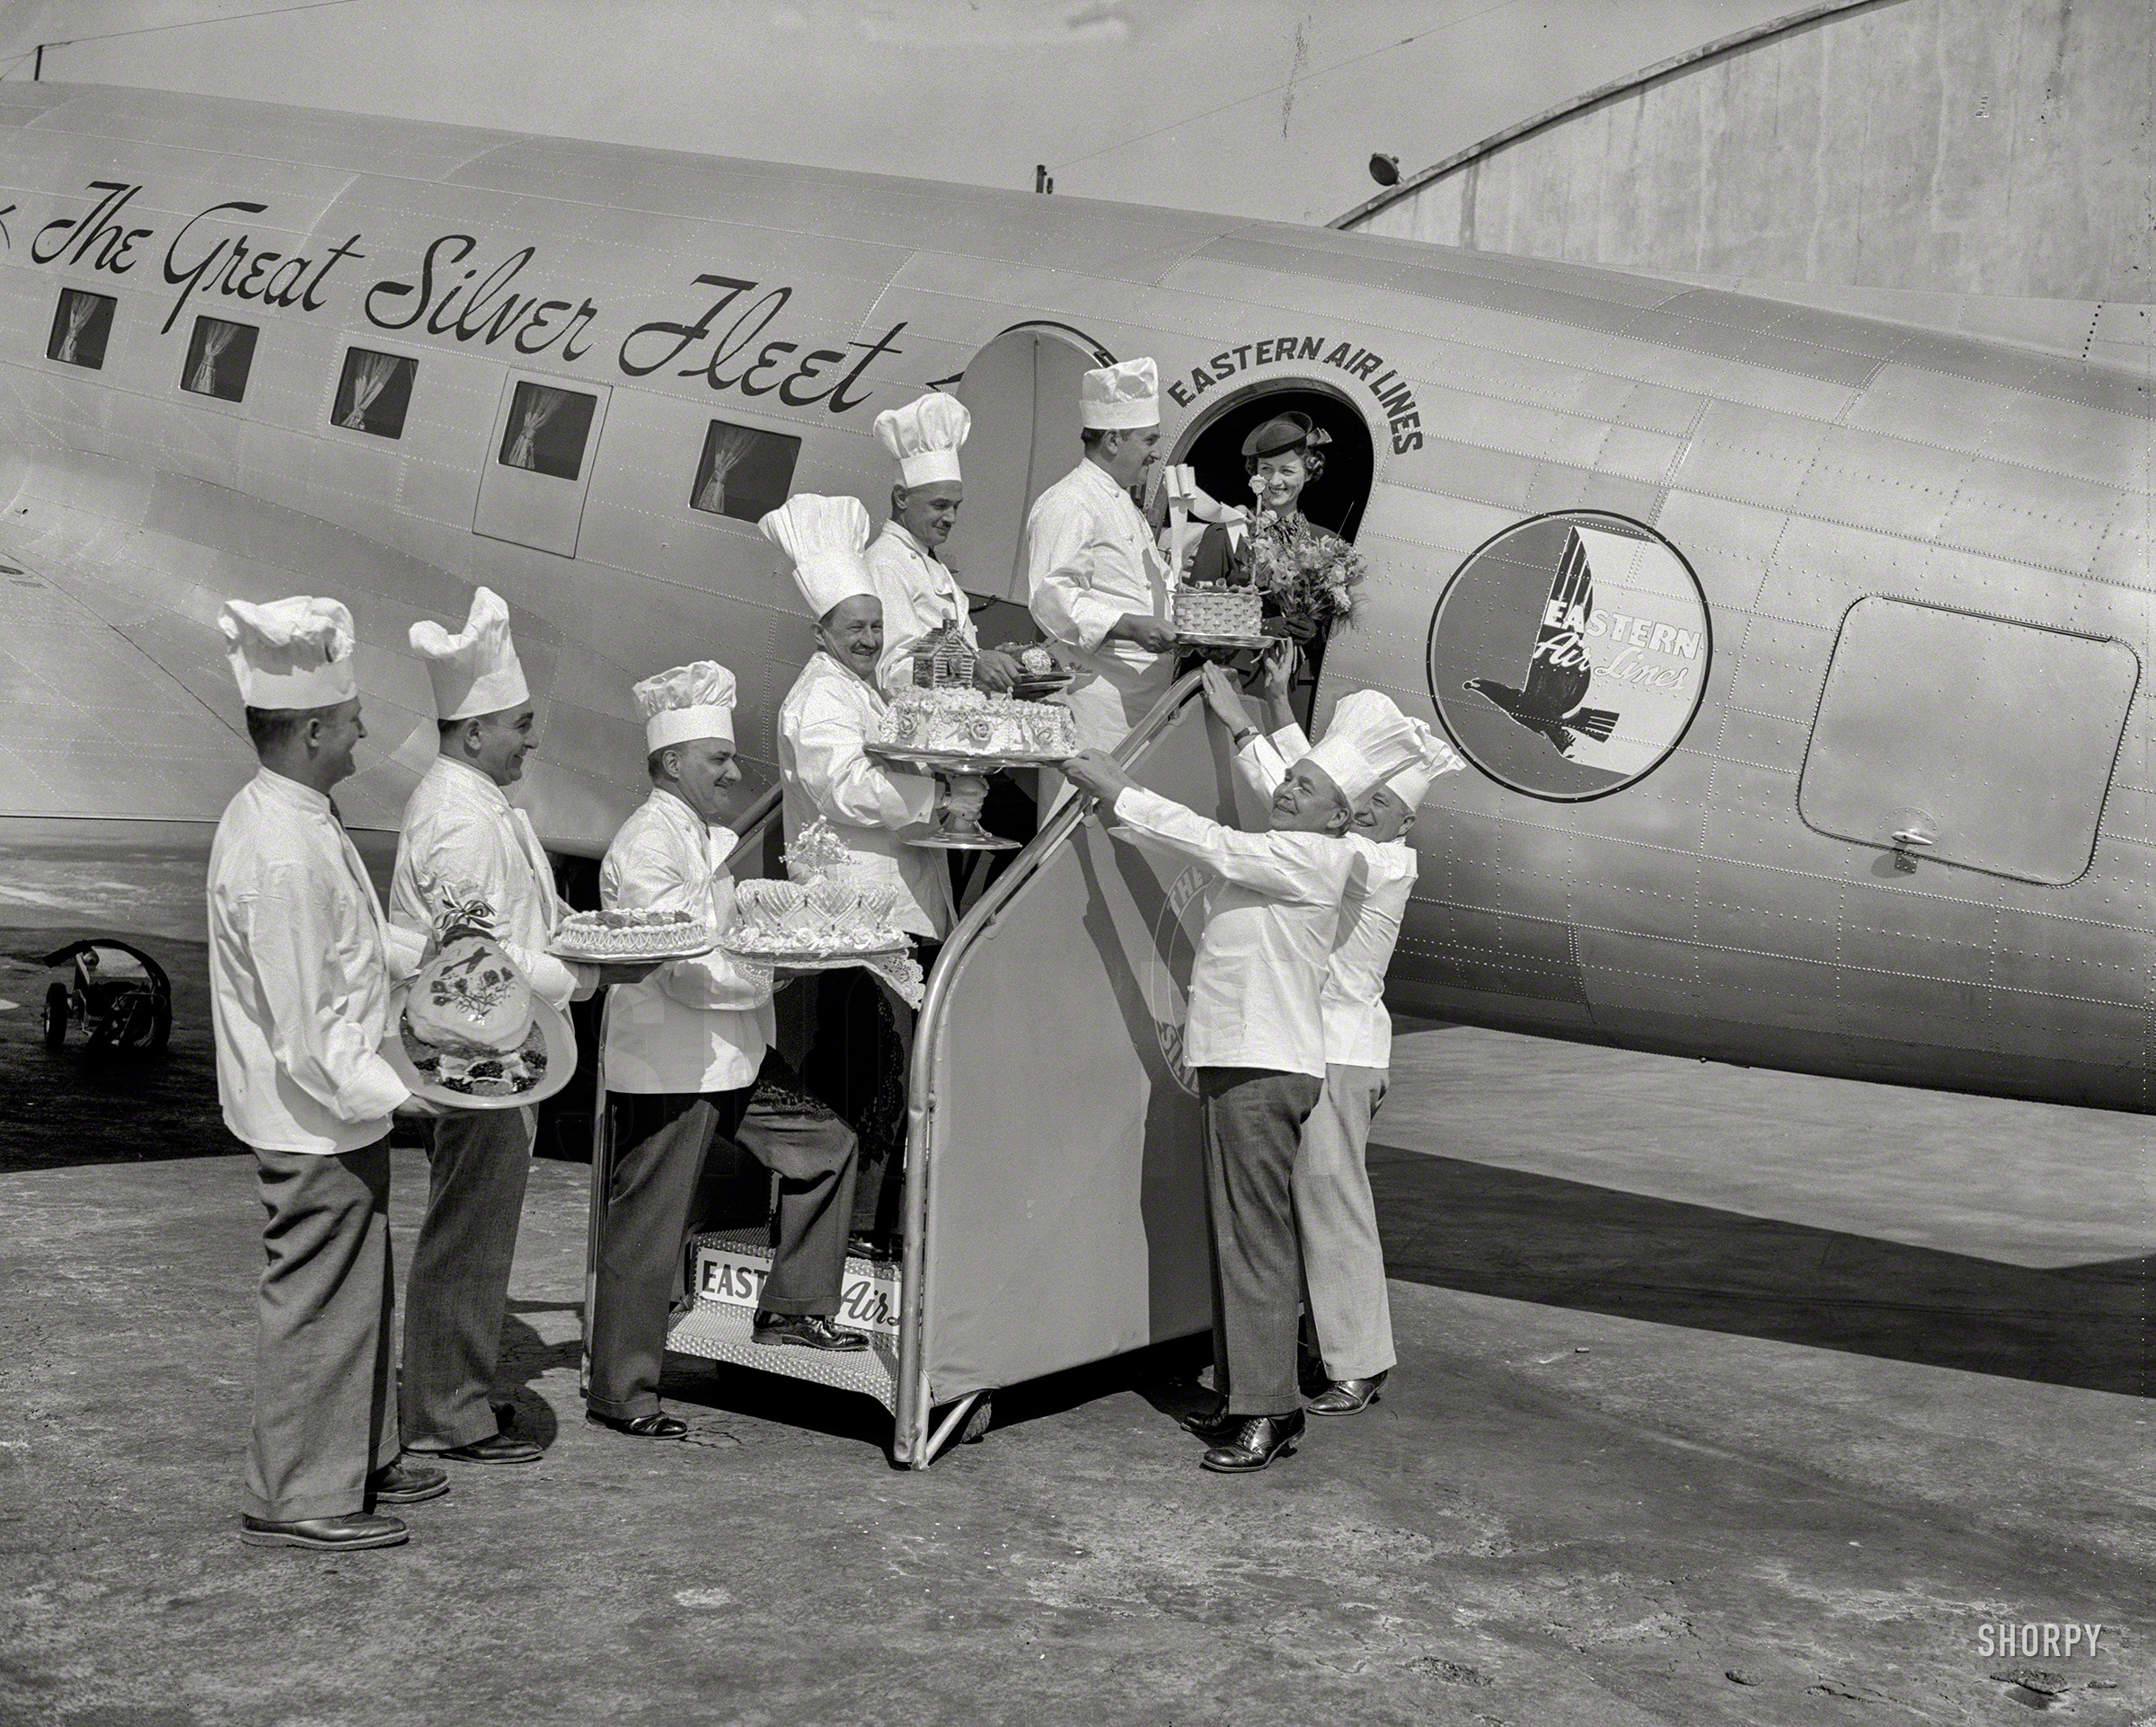 October 4, 1938. "Cakes for sky riders. Air travelers leaving Washington Airport during National Air Travel Week, Oct. 2 through 9, are being given a special treat. Cakes baked from their favorite recipes are being put aboard each plane by chefs of the leading hotels in the Capital. Marjorie McKinnon, Eastern Airline hostess, is pictured receiving the delicacies from (left to right) Theophile Homberger, Hotel Hamilton; Eddie Weber, Shoreham Hotel; Joseph Cattaneo, Hotel Washington; Fritz Meissner, Hay-Adams; Abraham Grob, Wardman Park; Joseph Tucci, Raleigh; Jacques Haerringer, Shoreham; Otto Merz, Willard." View full size.